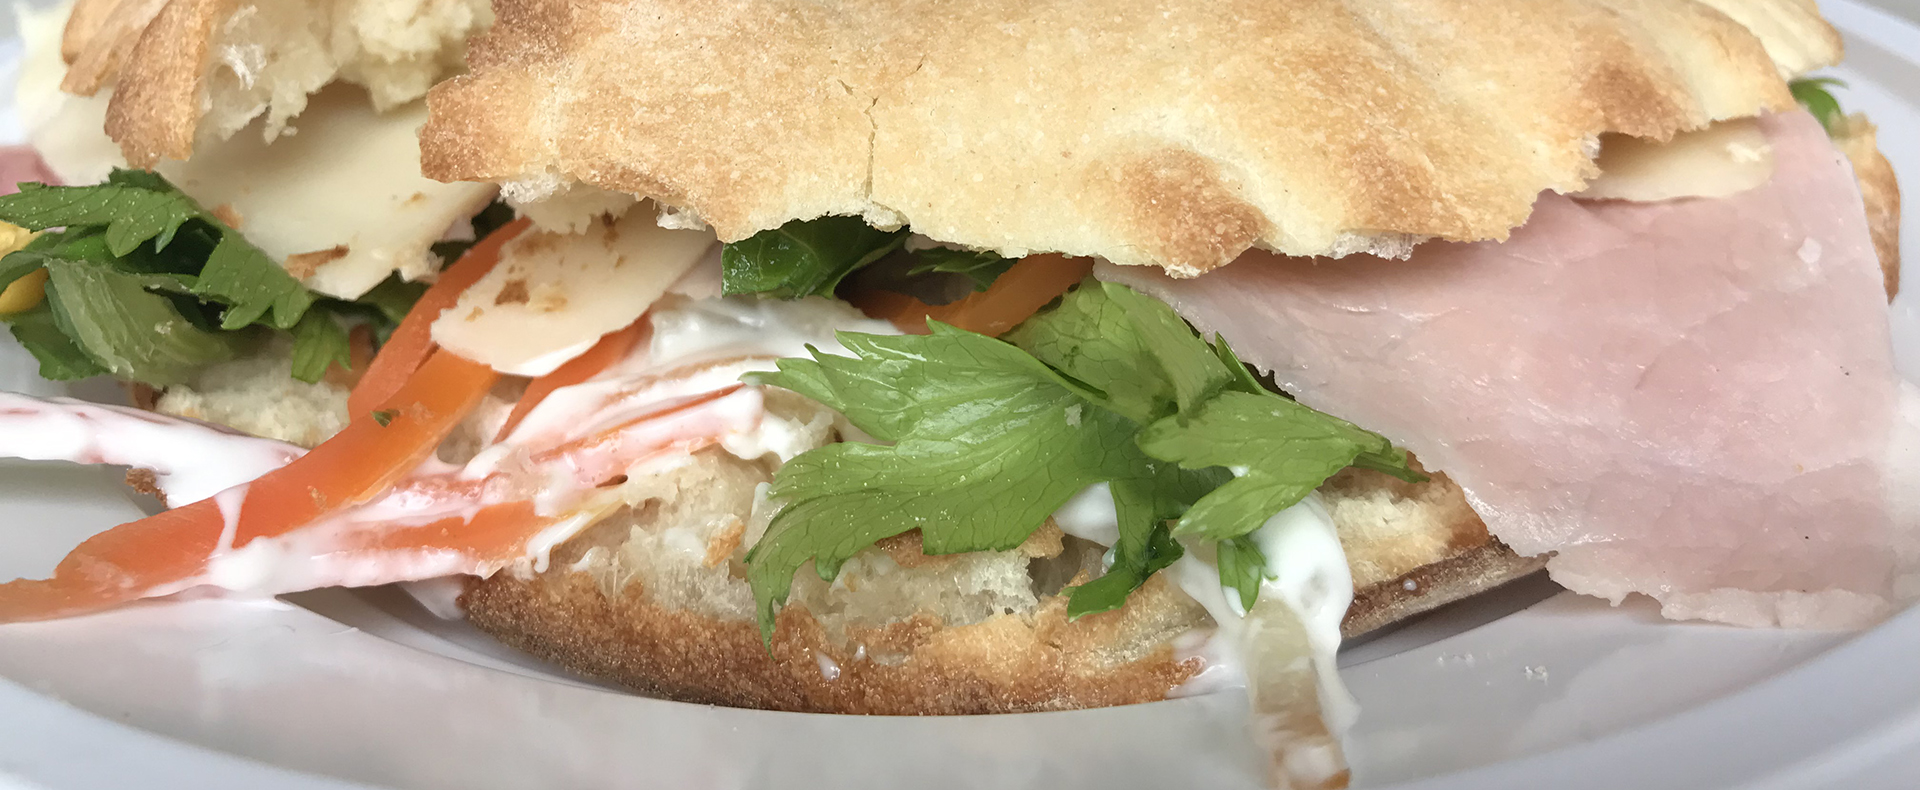 Puccia: Salento’s “anything goes” sandwich